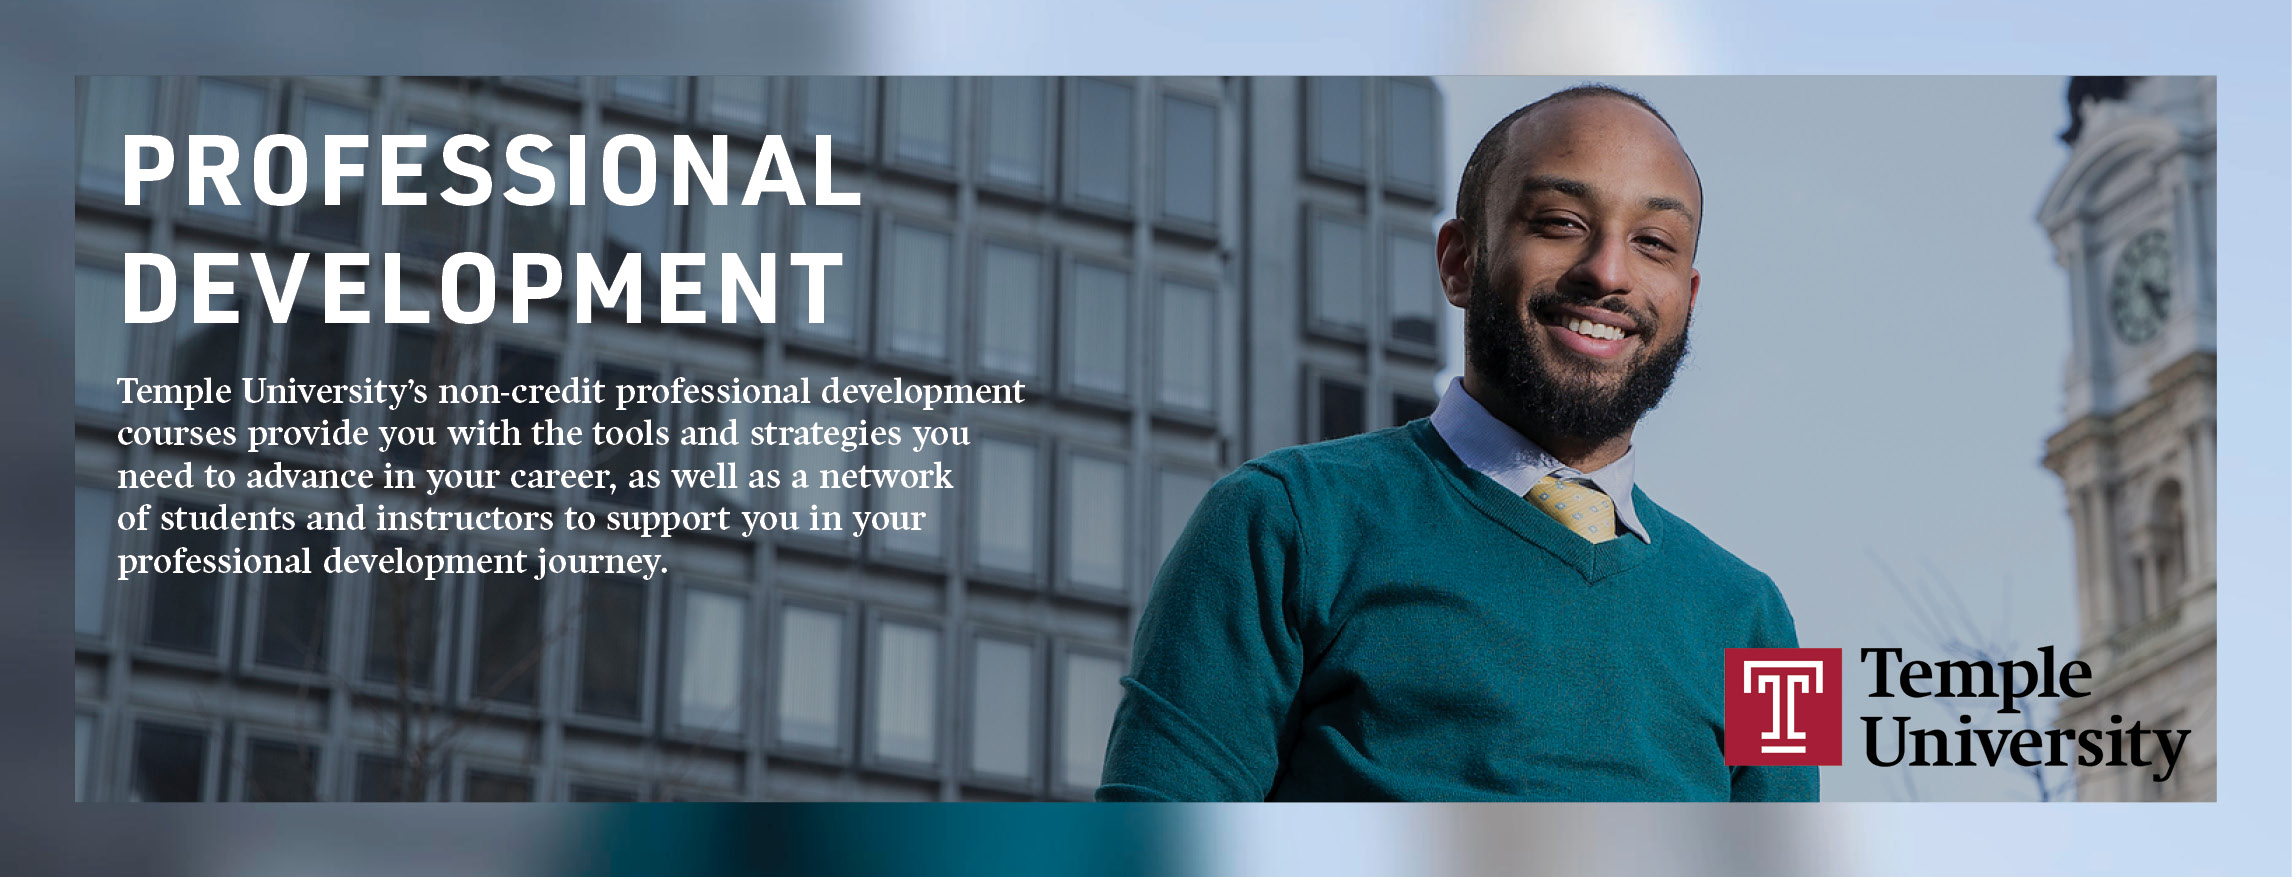 banner image of a guy wearing formal and smiling towards the camera.It has the title Professional Development.